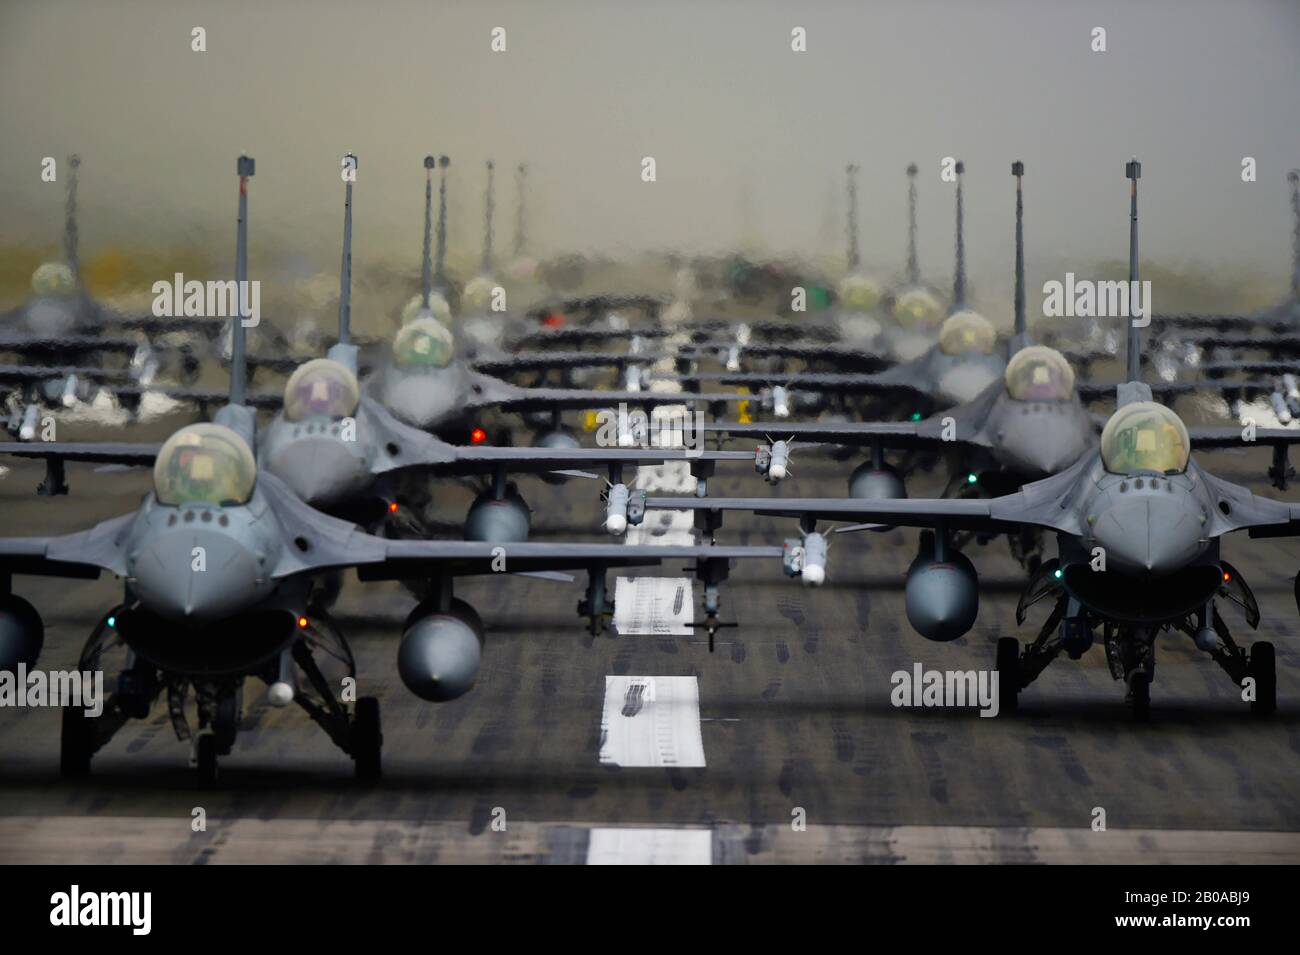 US Air Force USAF 2,500 aircraft from all services are stored 12X18 Photograph